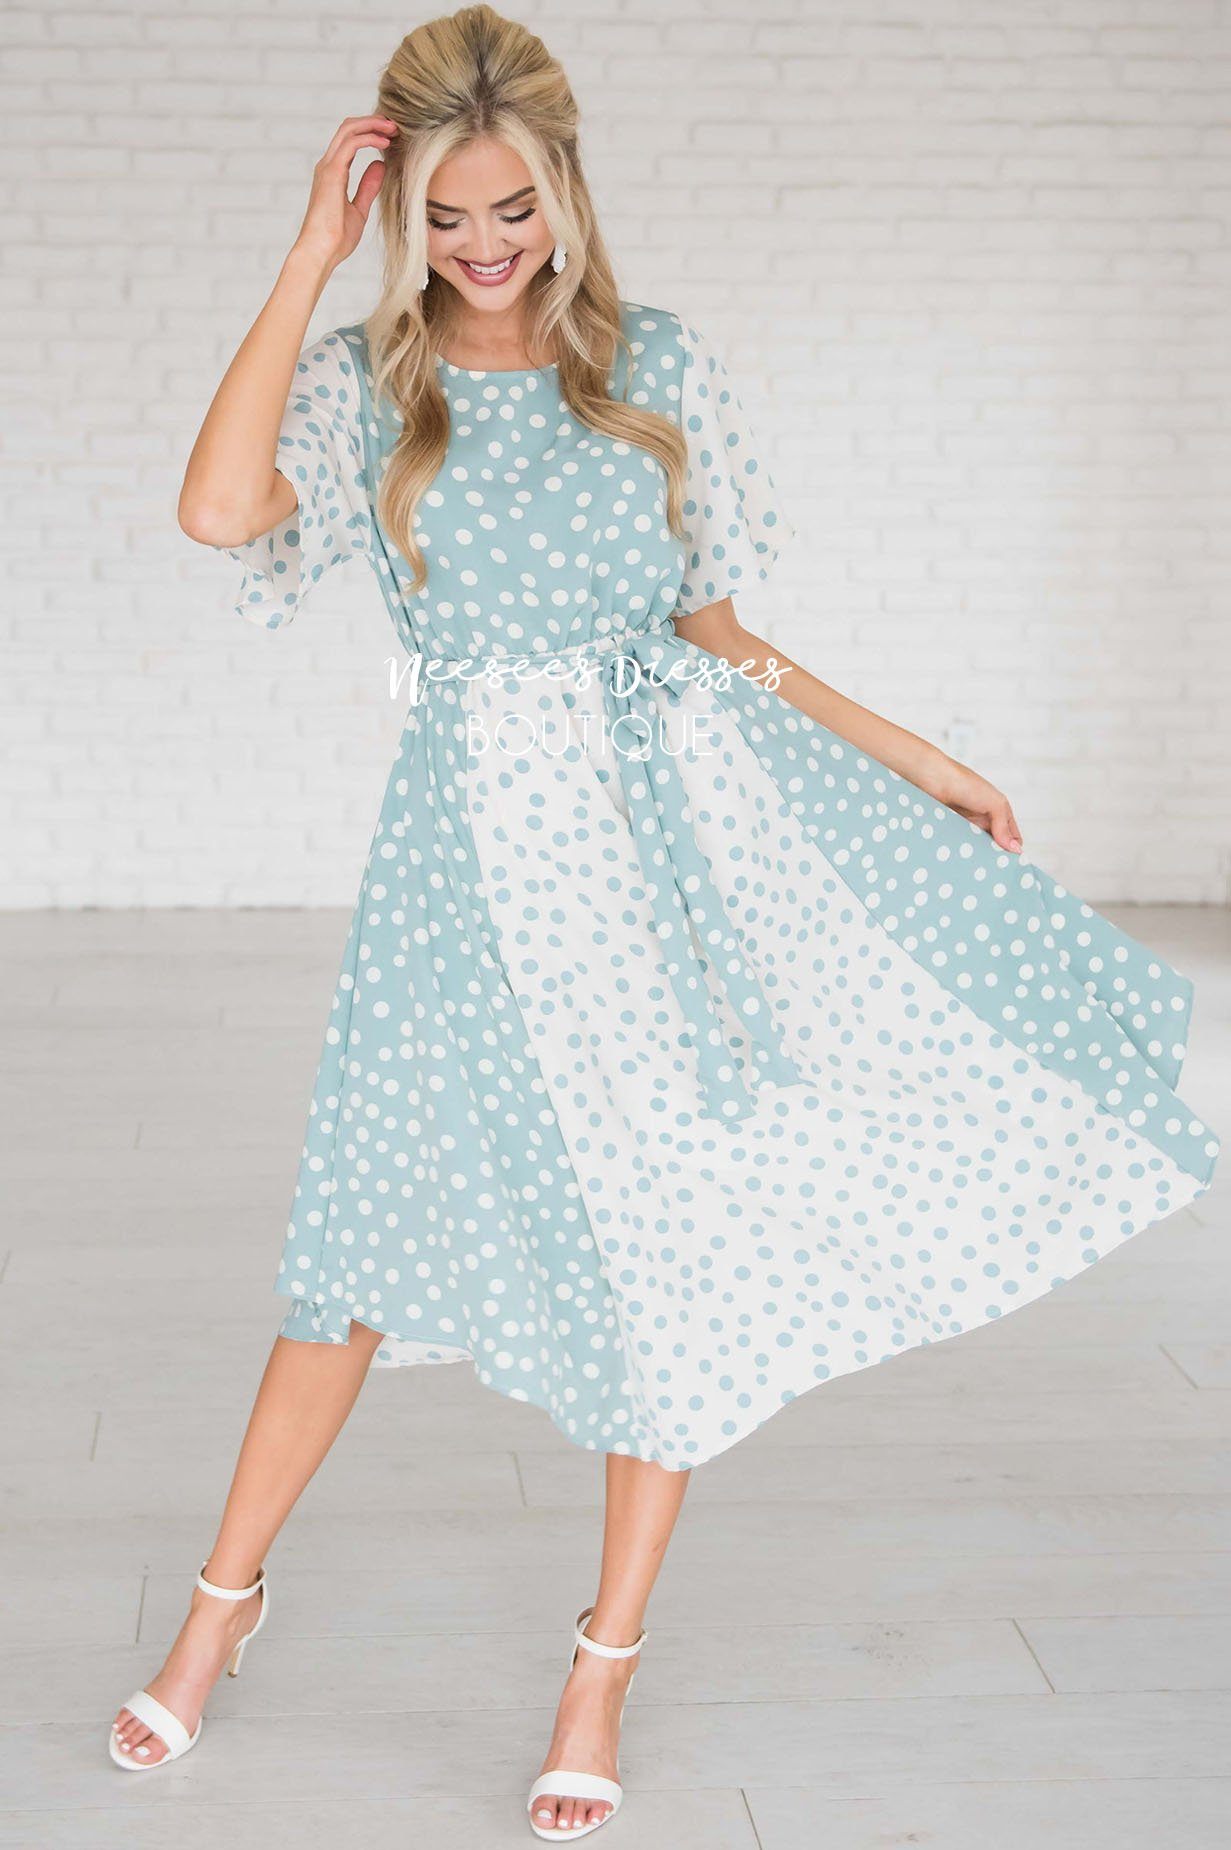 Dusty Blue Two Toned Polka Dot Modest Dress | Best Place To Buy Modest ...